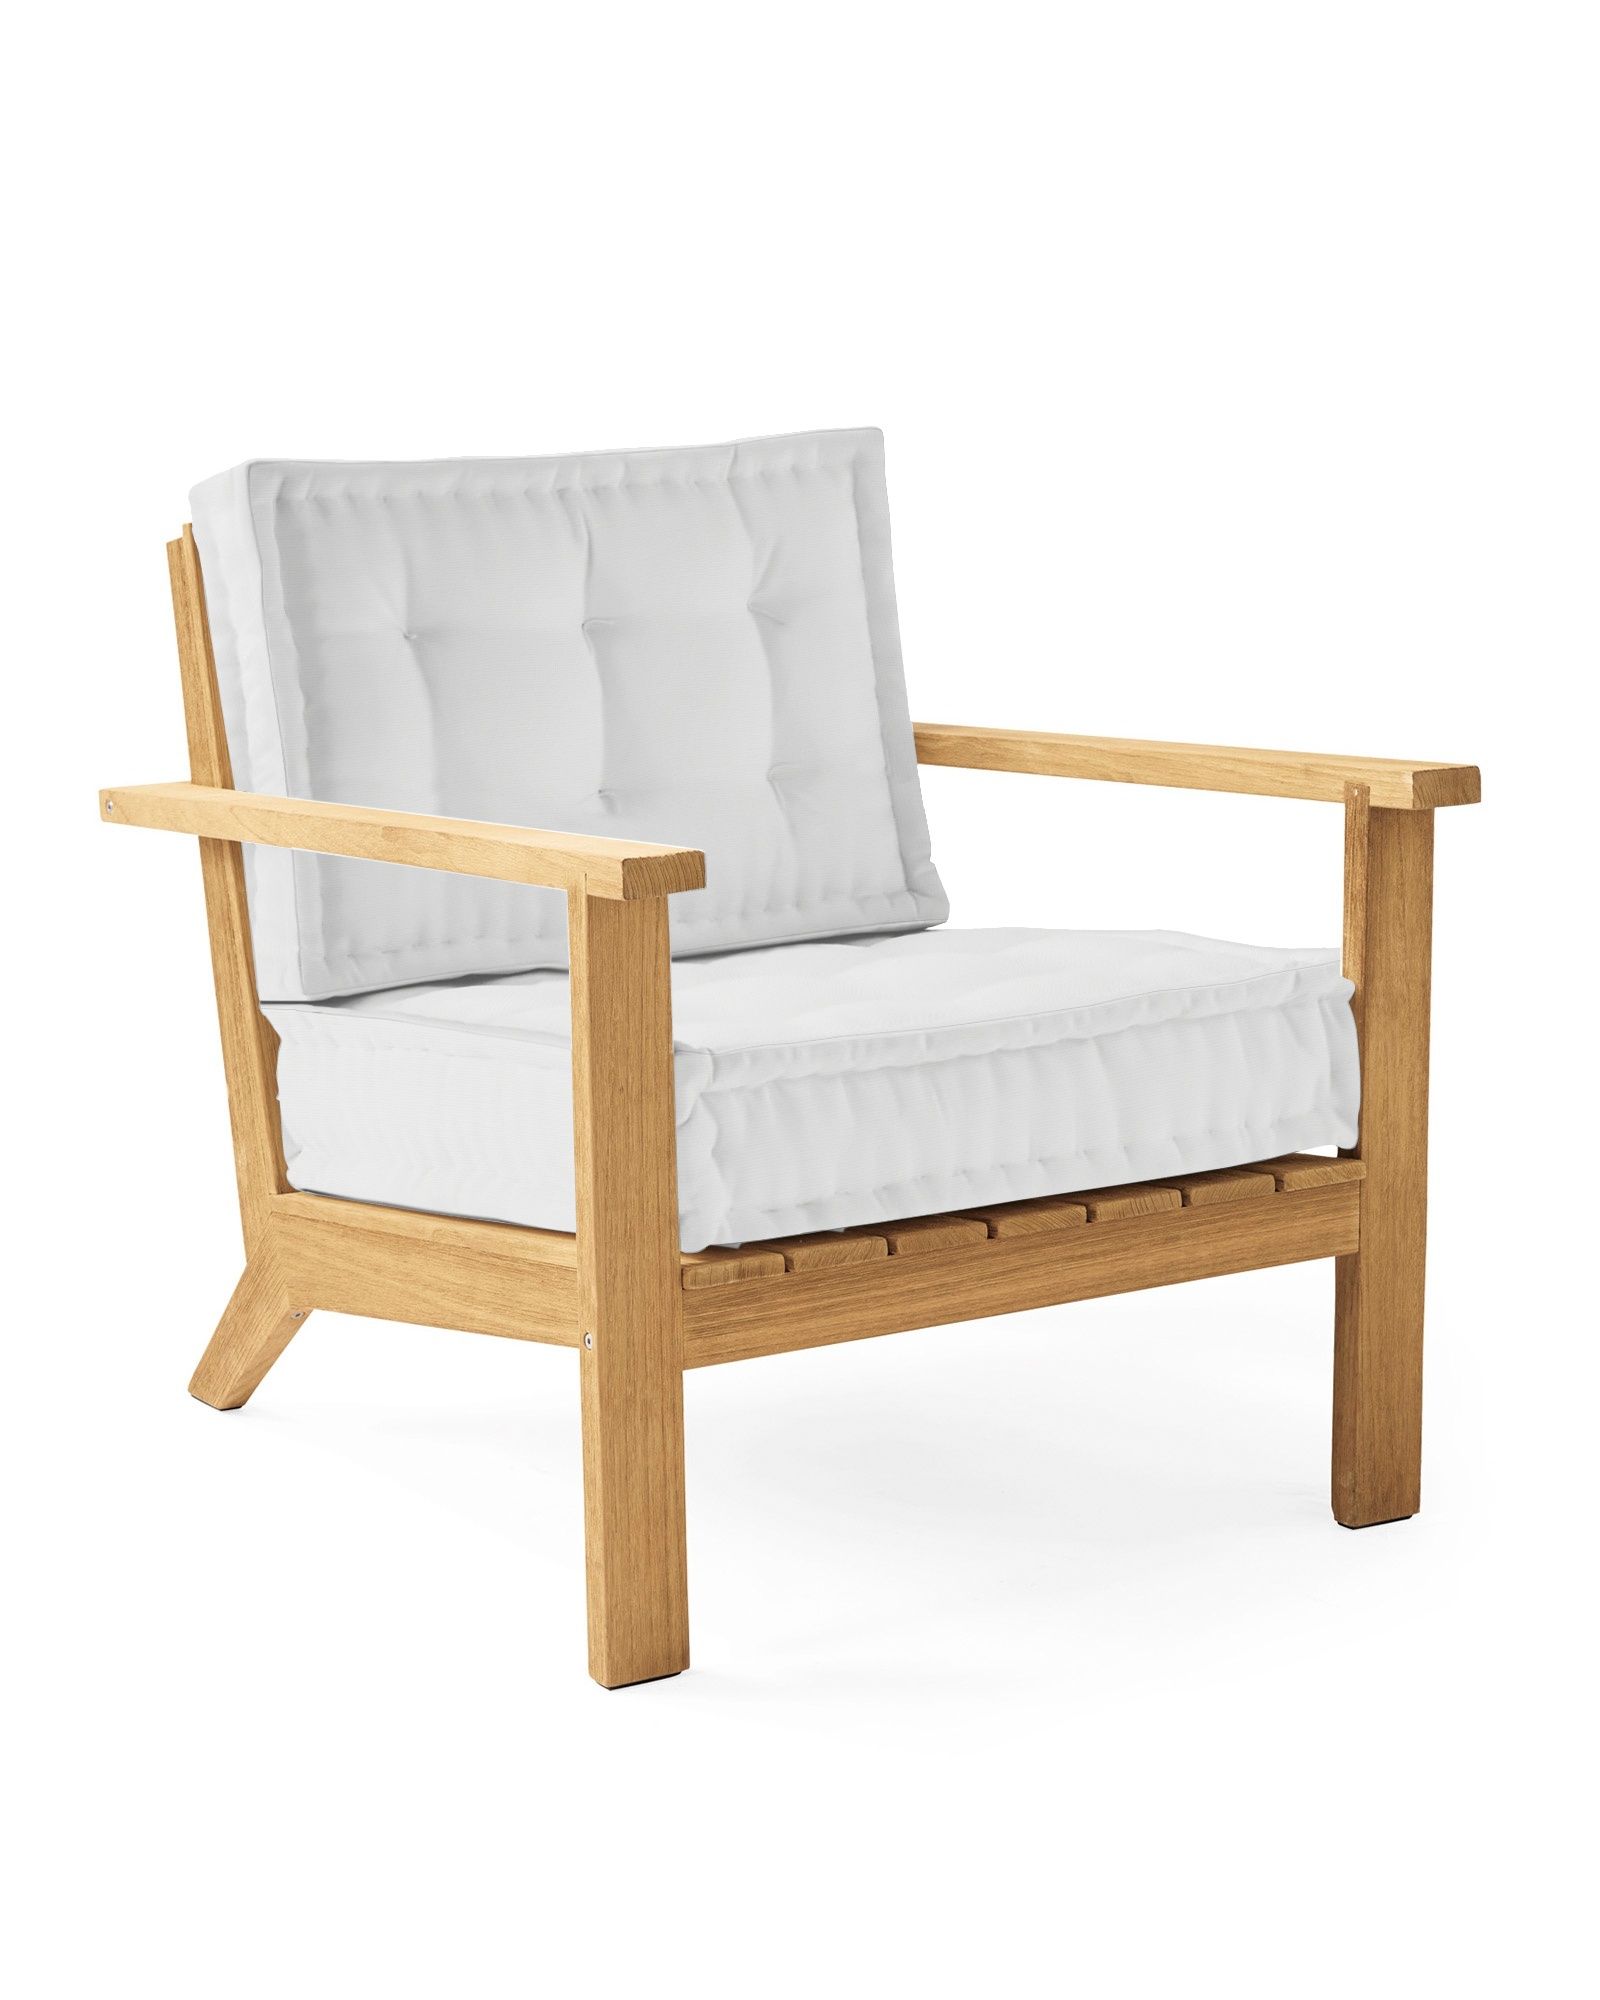 Cliffside Teak Lounge Chair | Serena and Lily